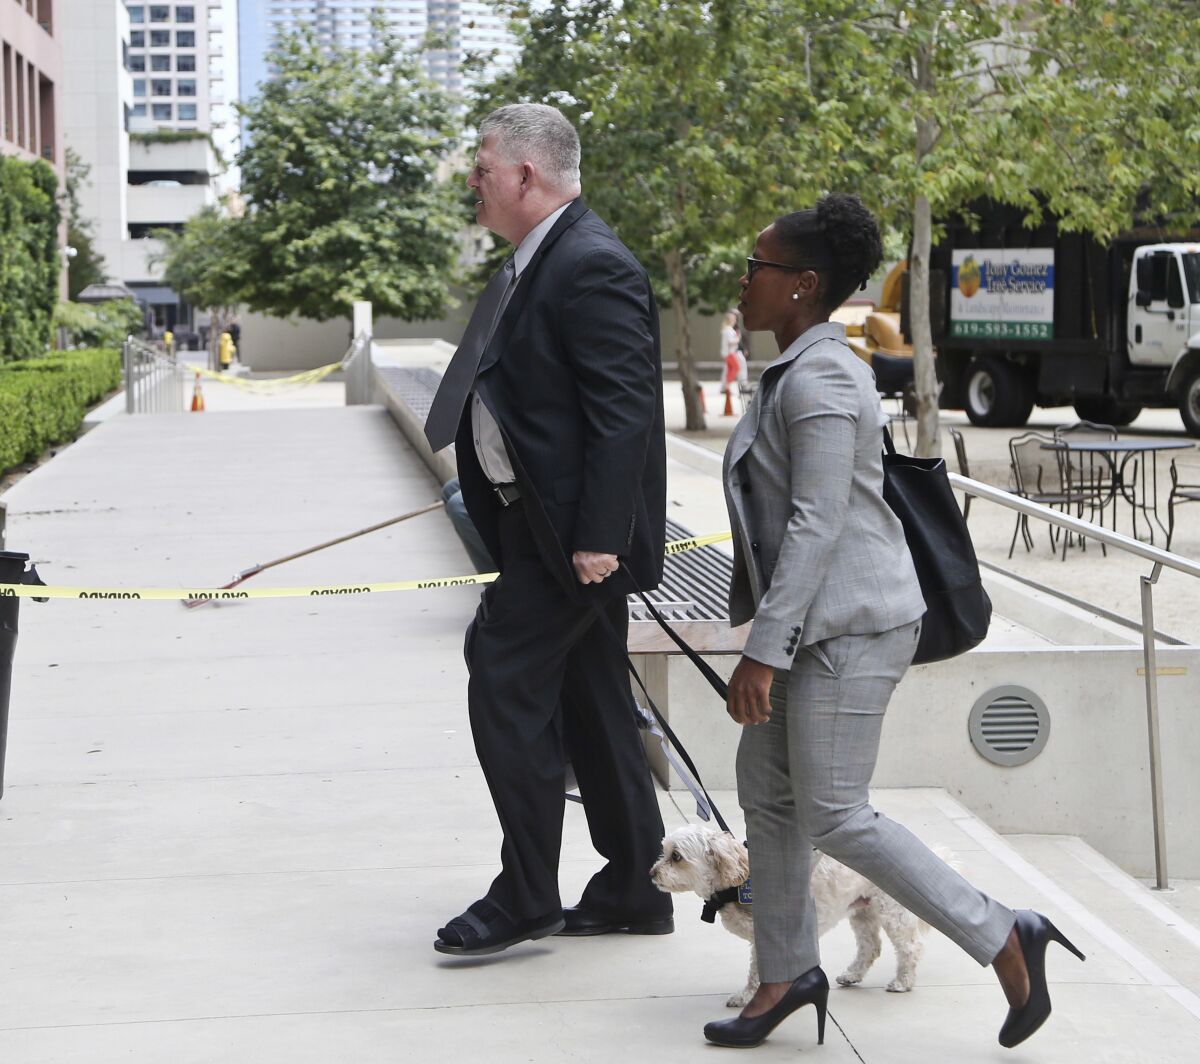 FILE - Rear Adm. Robert Gilbeau enters the federal courthouse in San Diego on Thursday, June 9, 2016. Gilbeau pleaded guilty Thursday to lying to federal authorities investigating a $34 million fraud scheme involving a Malaysian contractor known as "Fat Leonard." Dozens of U.S. Naval officers have admitted to being bought off by a gregarious, rotund Malaysian defense contractor known as "Fat Leonard" who obtained military secrets. (AP Photo/Lenny Ignelzi,File)